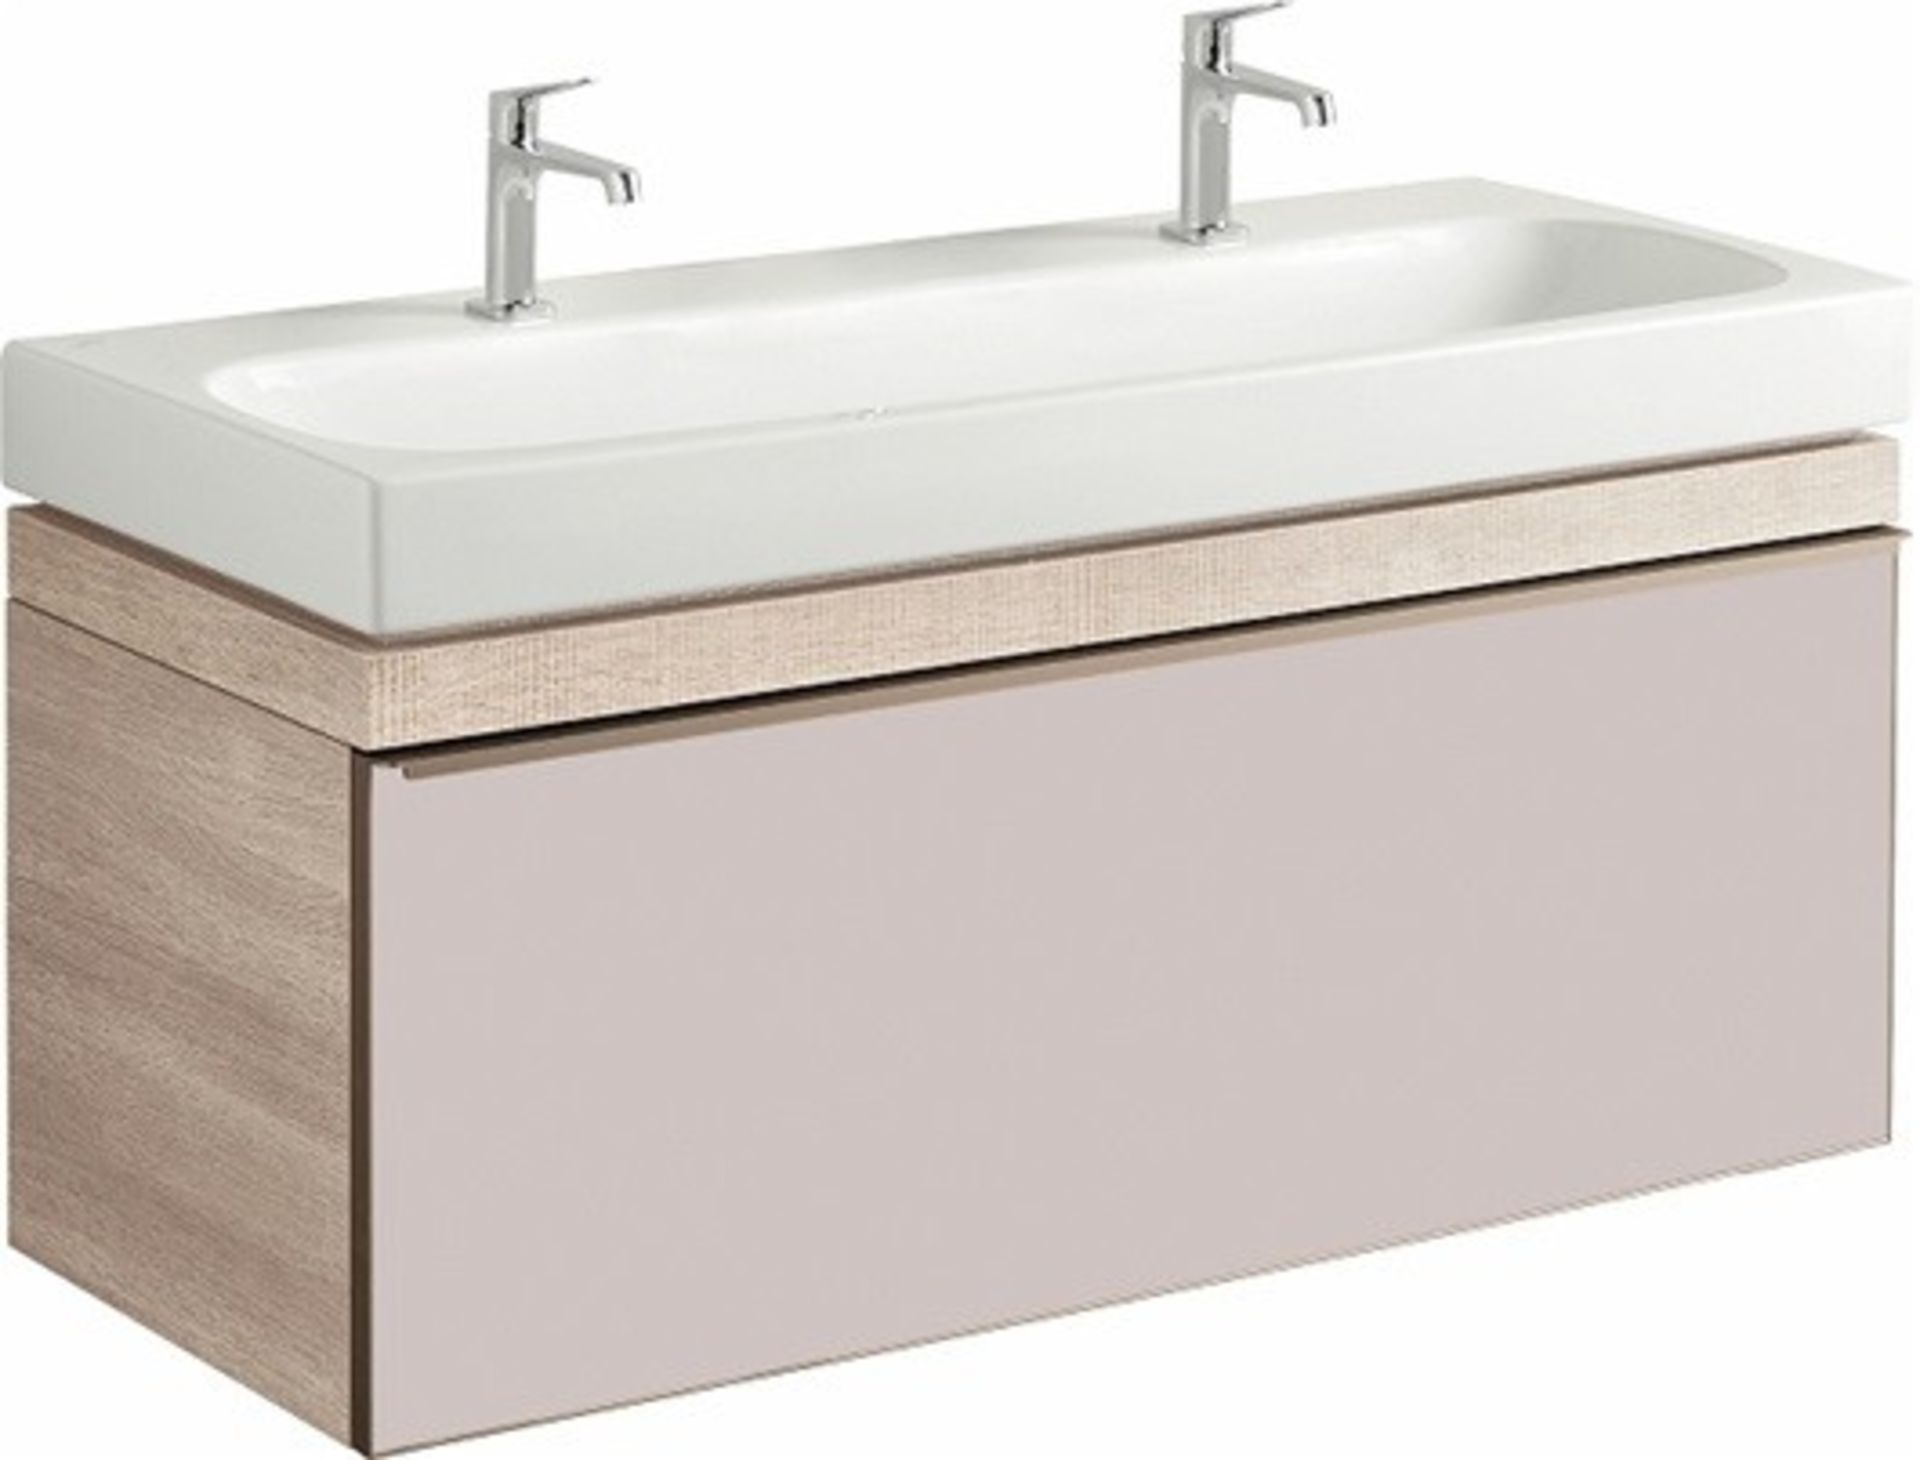 NEW & BOXED Keramag Citterio 1200mm Natural Oak/Beige Wall Hung Vanity Unit. RRP £2,89.99 Co... - Image 3 of 3